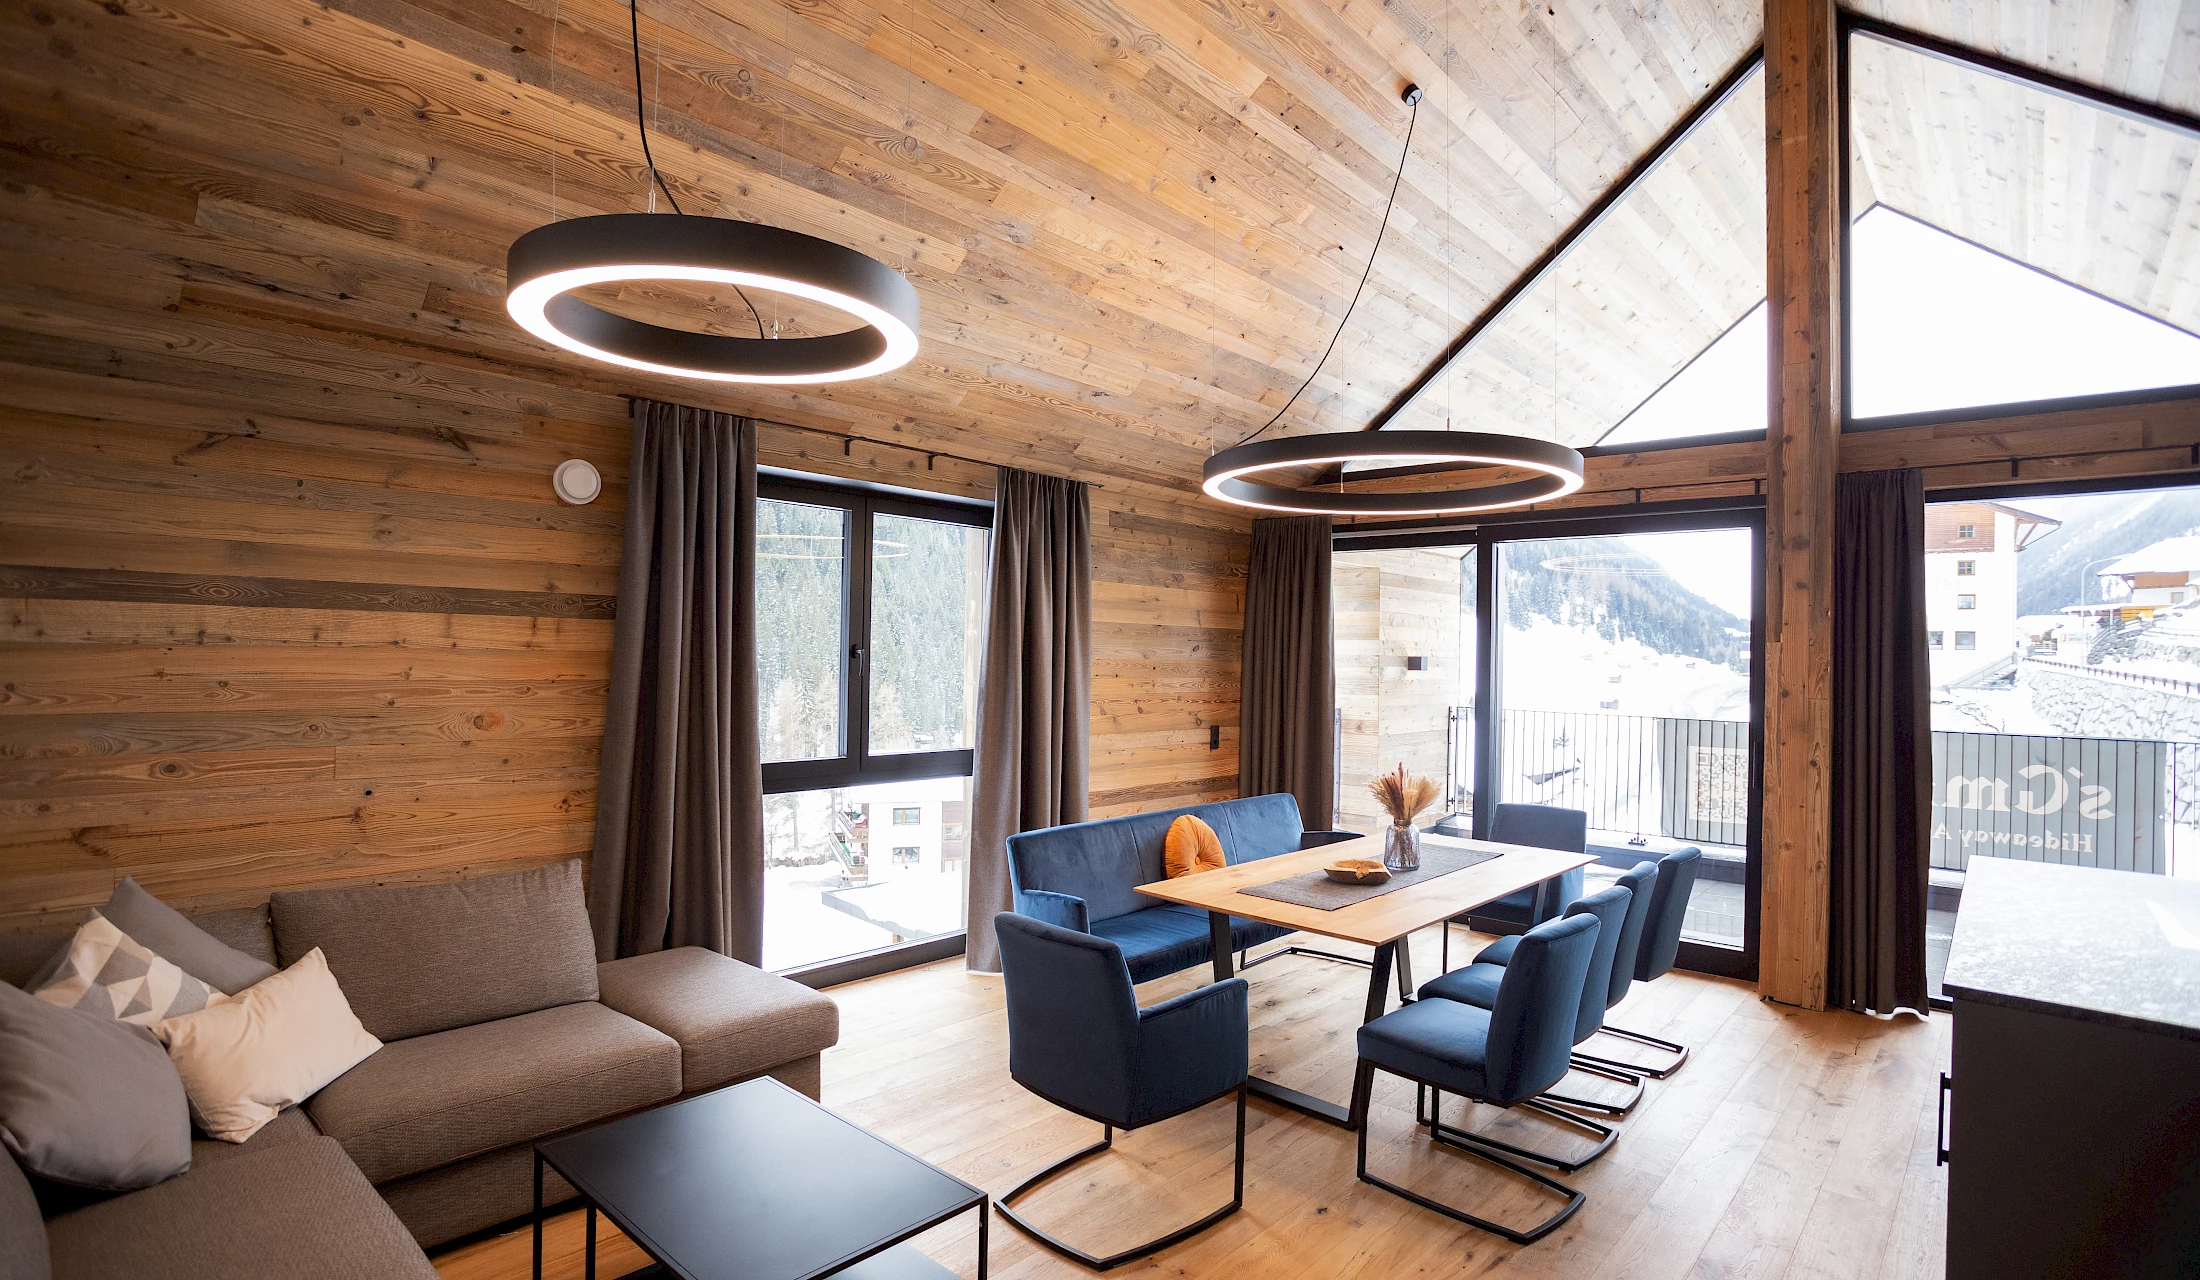 The apartment sGmiatli in Kappl impresses as a vacation apartment with lots of space and comfort. The Adler Chalet is a special highlight of the apartment.